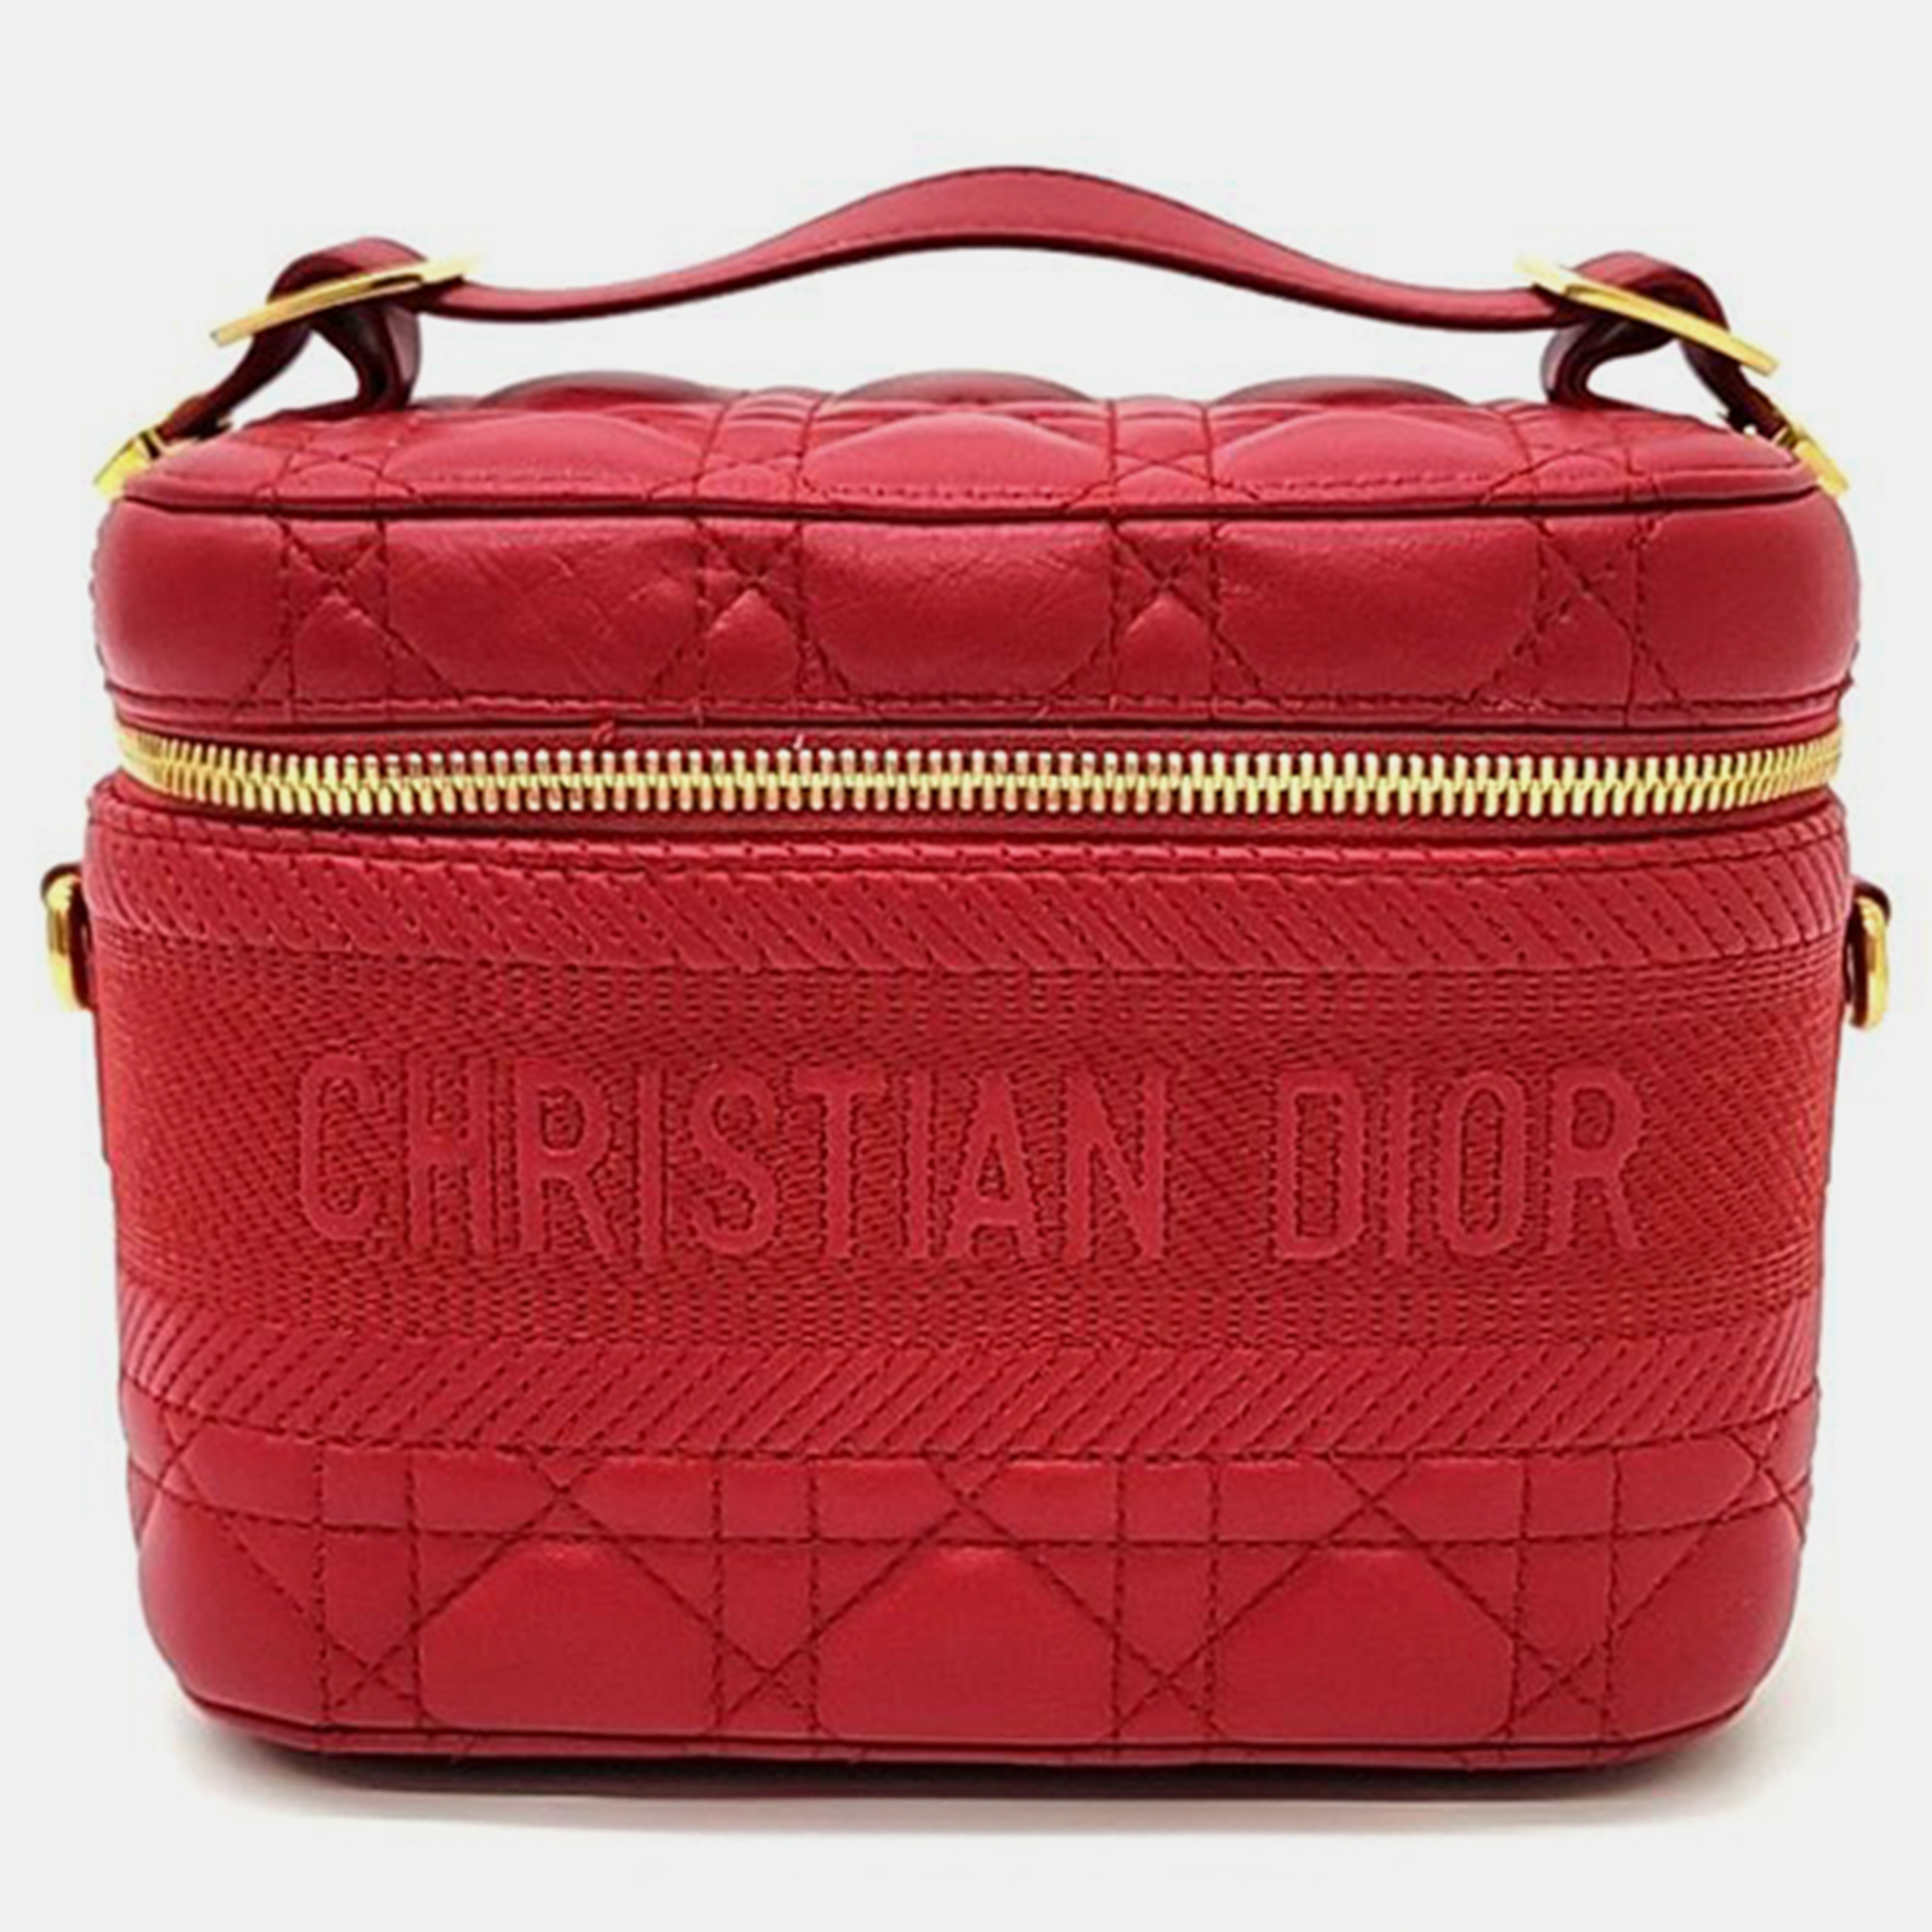 

Christian Dior Vanity Case Small, Red